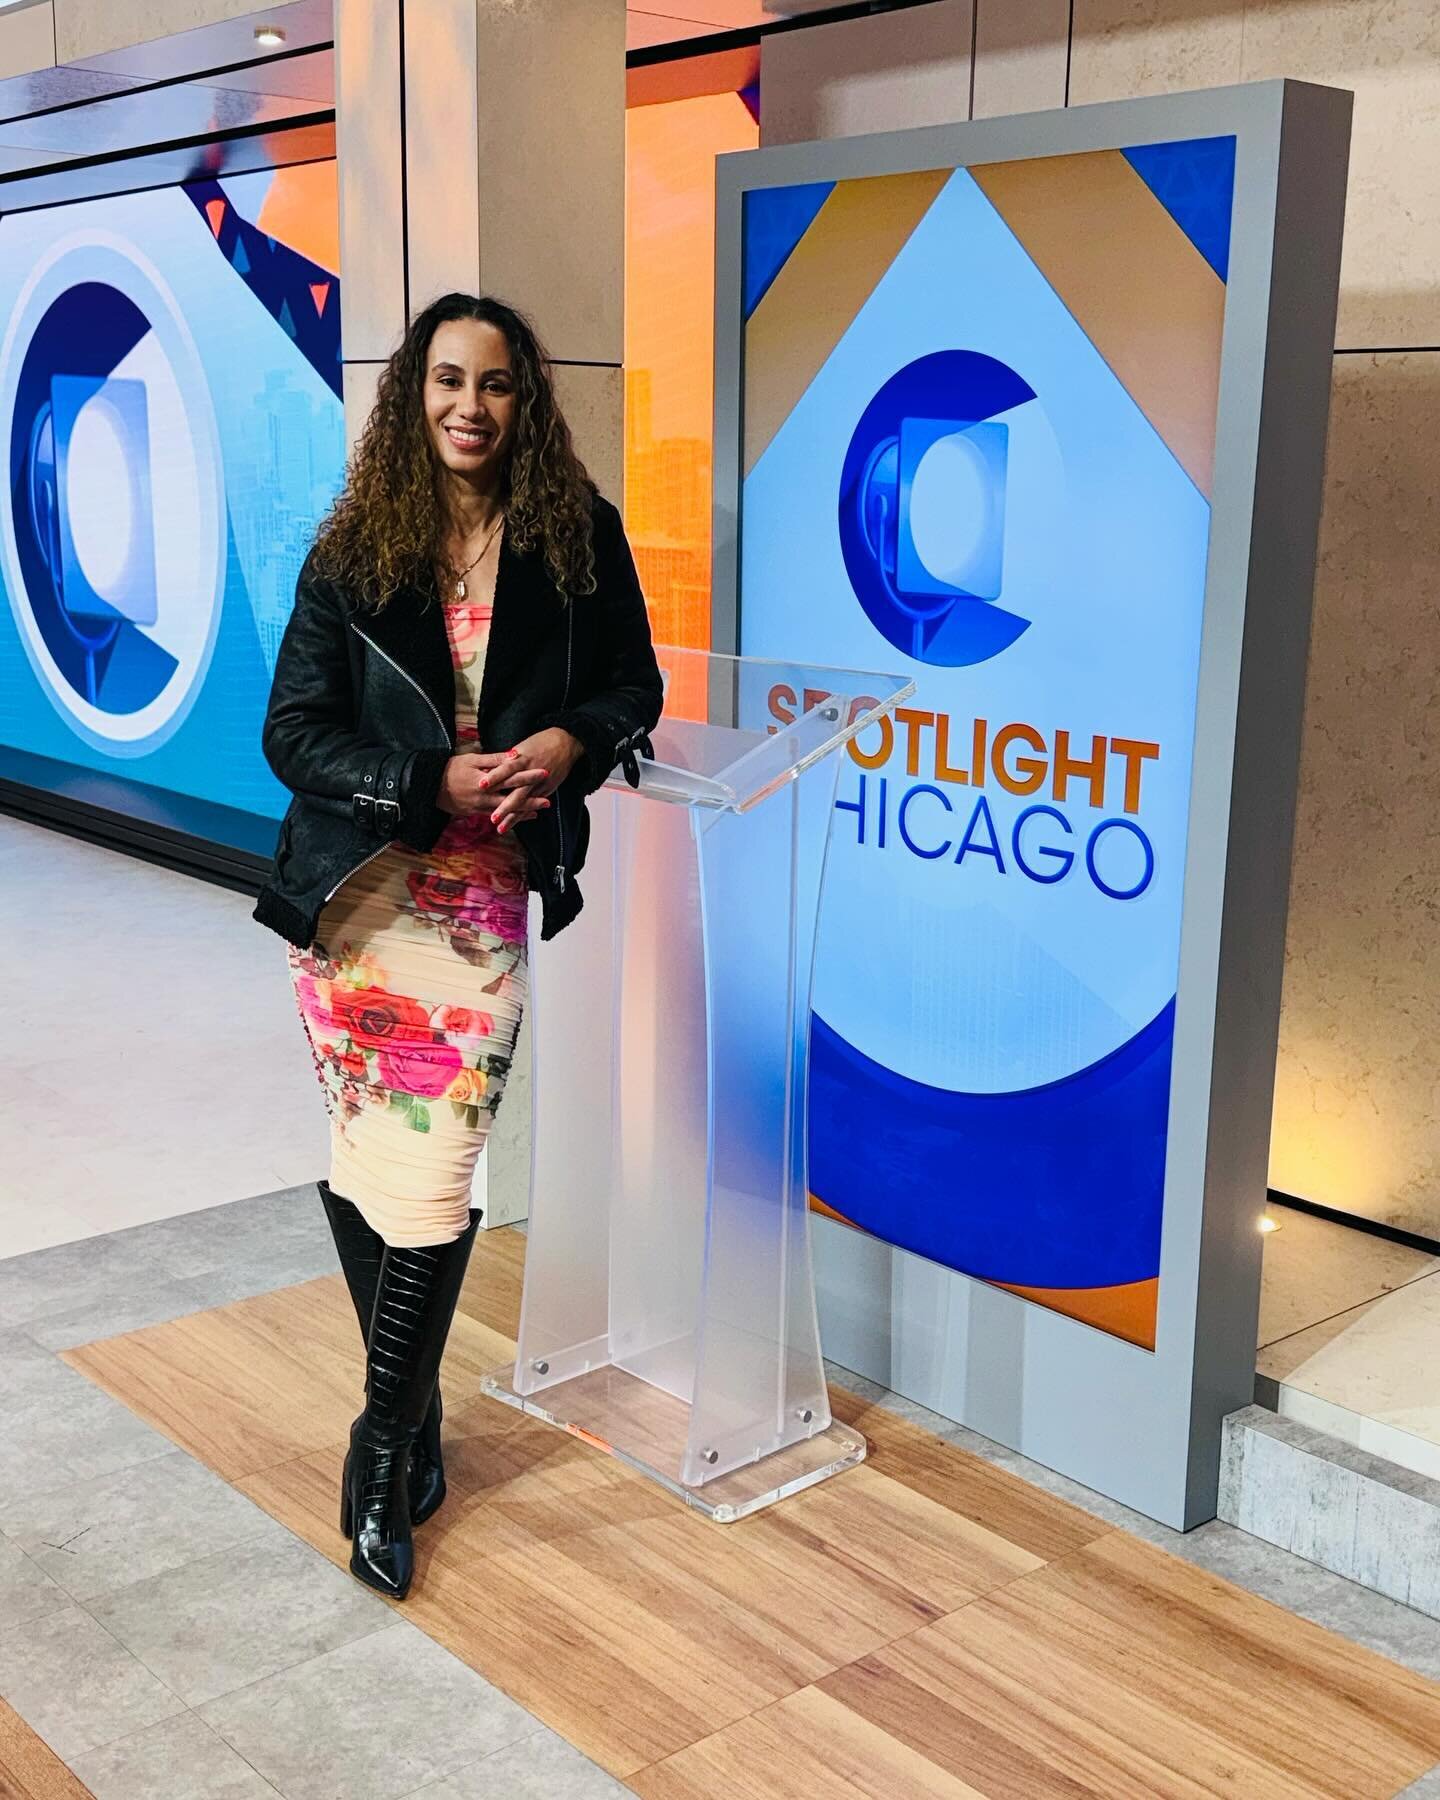 Hey friends! I&rsquo;ll be on WGN&rsquo;s Spotlight Chicago at 3pm today talking about Flower Girls Meet and what folks can expect at our gatherings. We&rsquo;ll demonstrate Narrative Exposure Therapy, a modality which uses the power of storytelling 